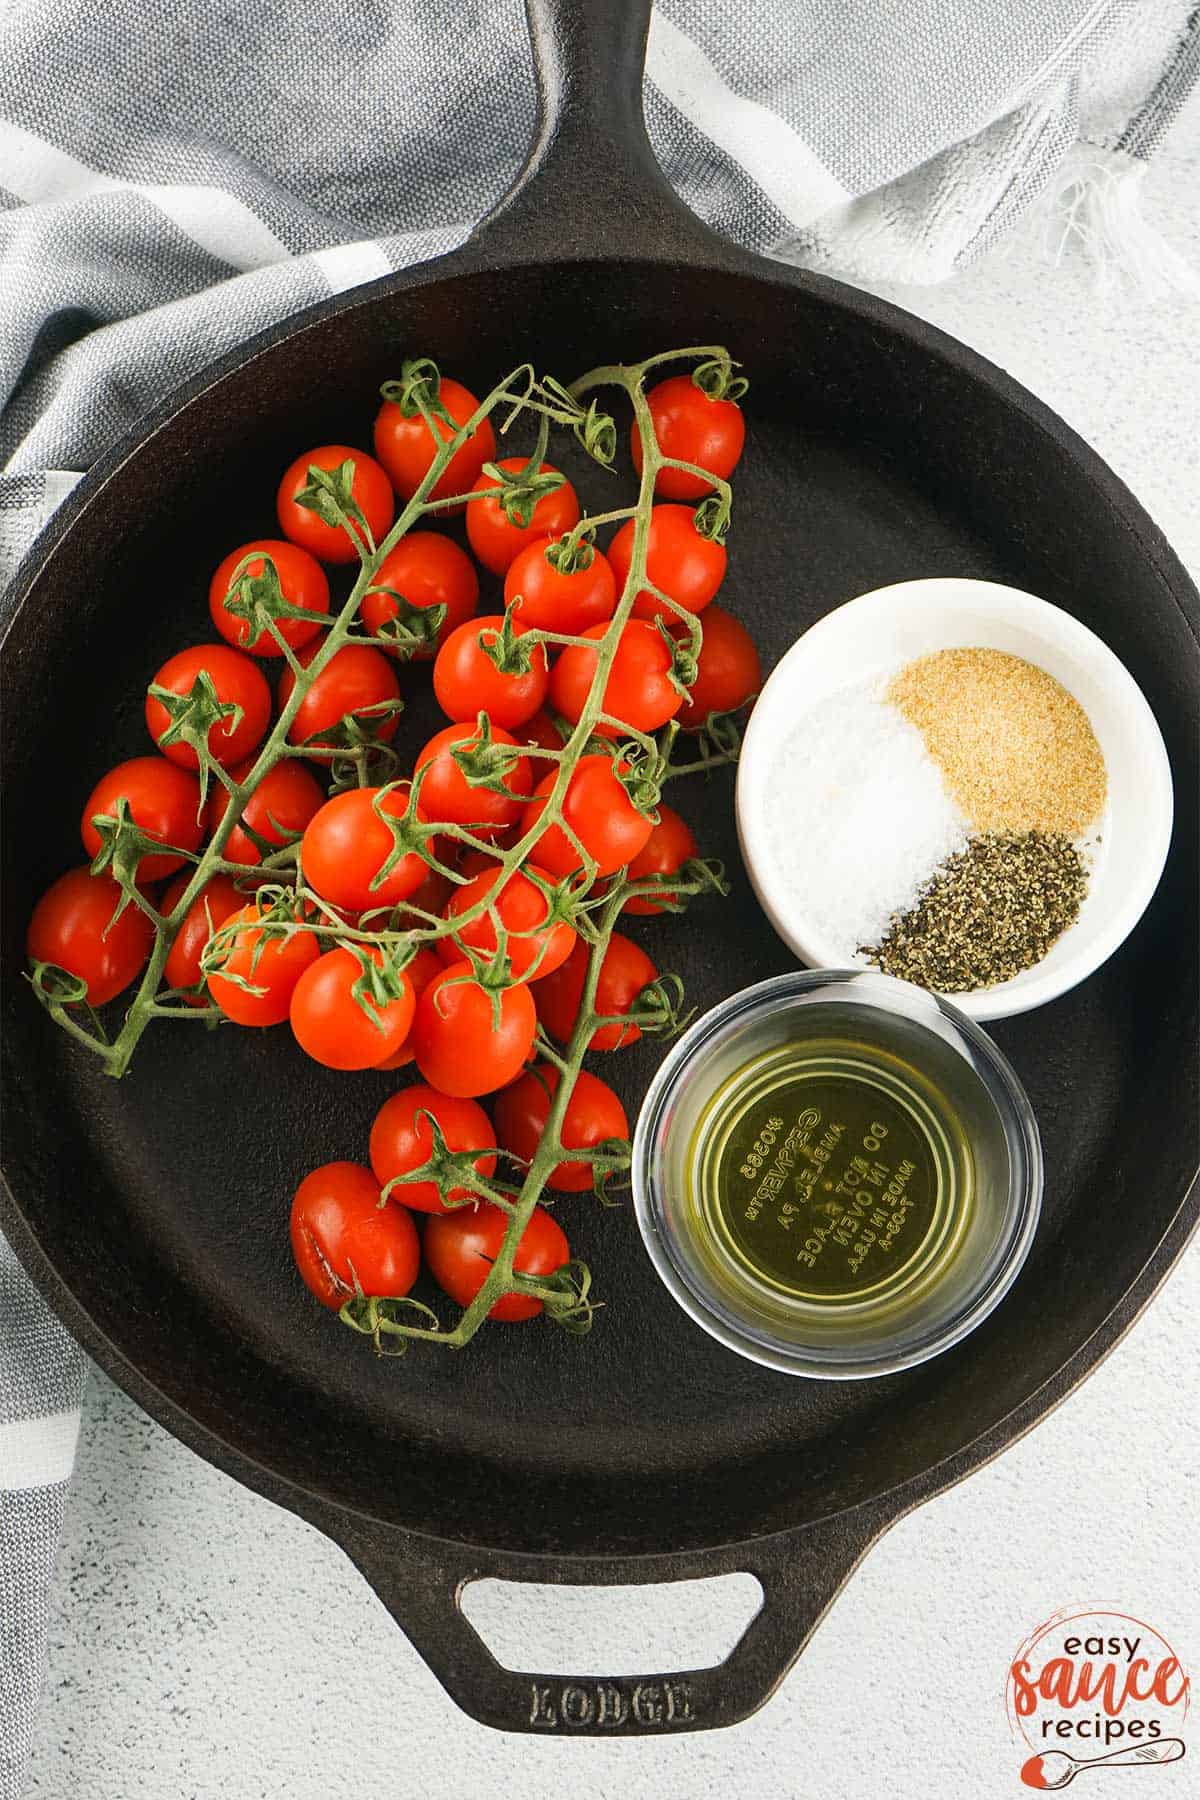 ingredients for roasted tomatoes in a skillet